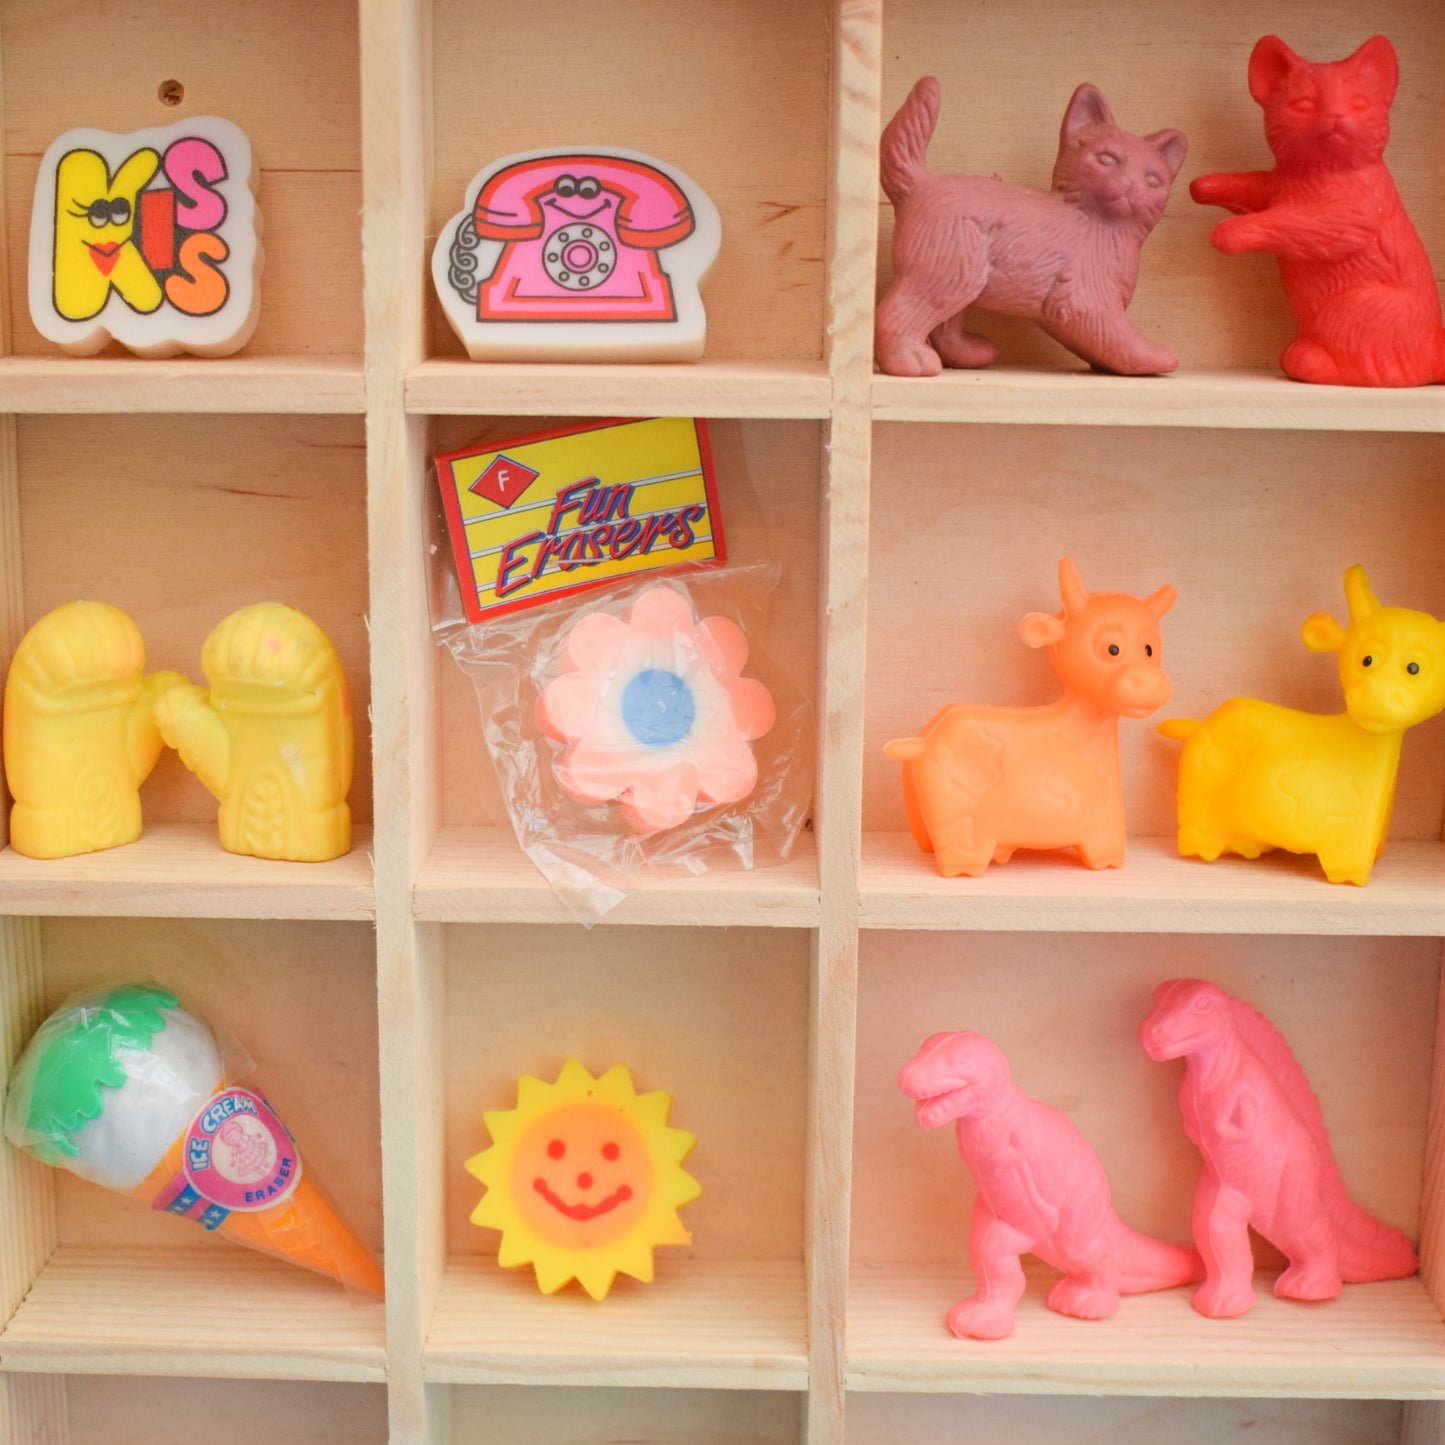 Vintage 1980s Collectable Erasers / Rubbers